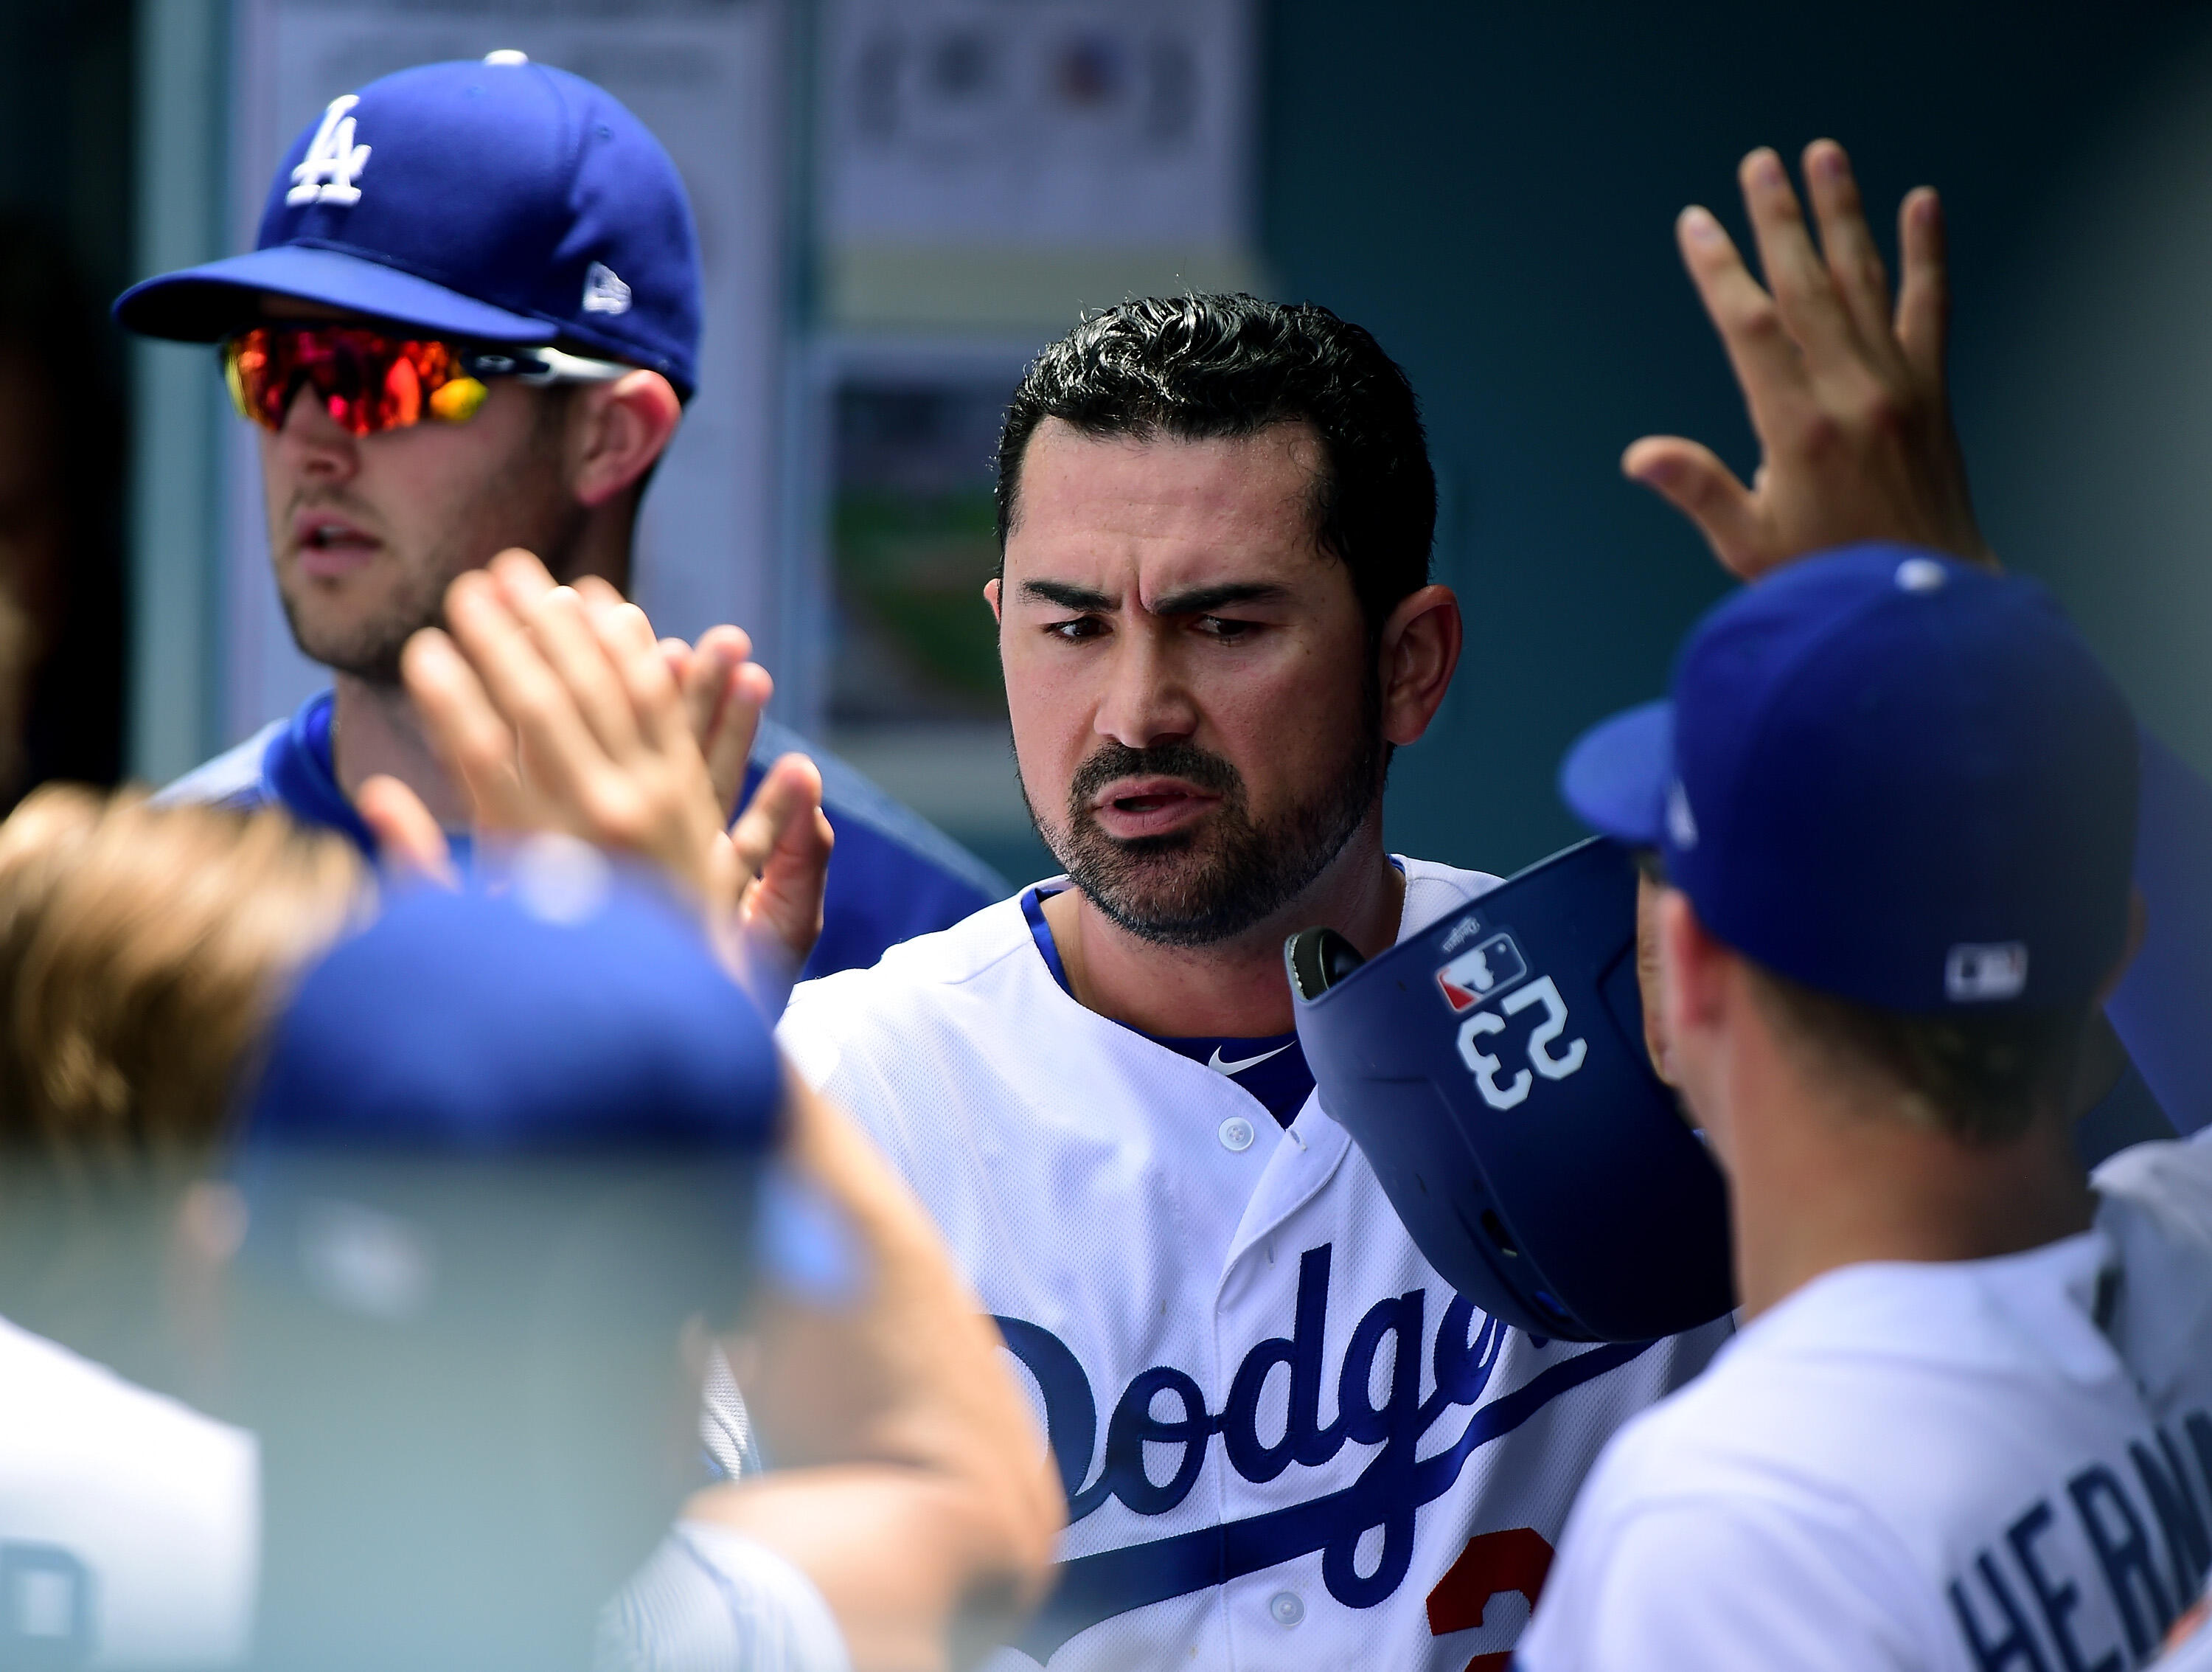 Nomar Garciaparra takes starring role in Dodger Youth Camps